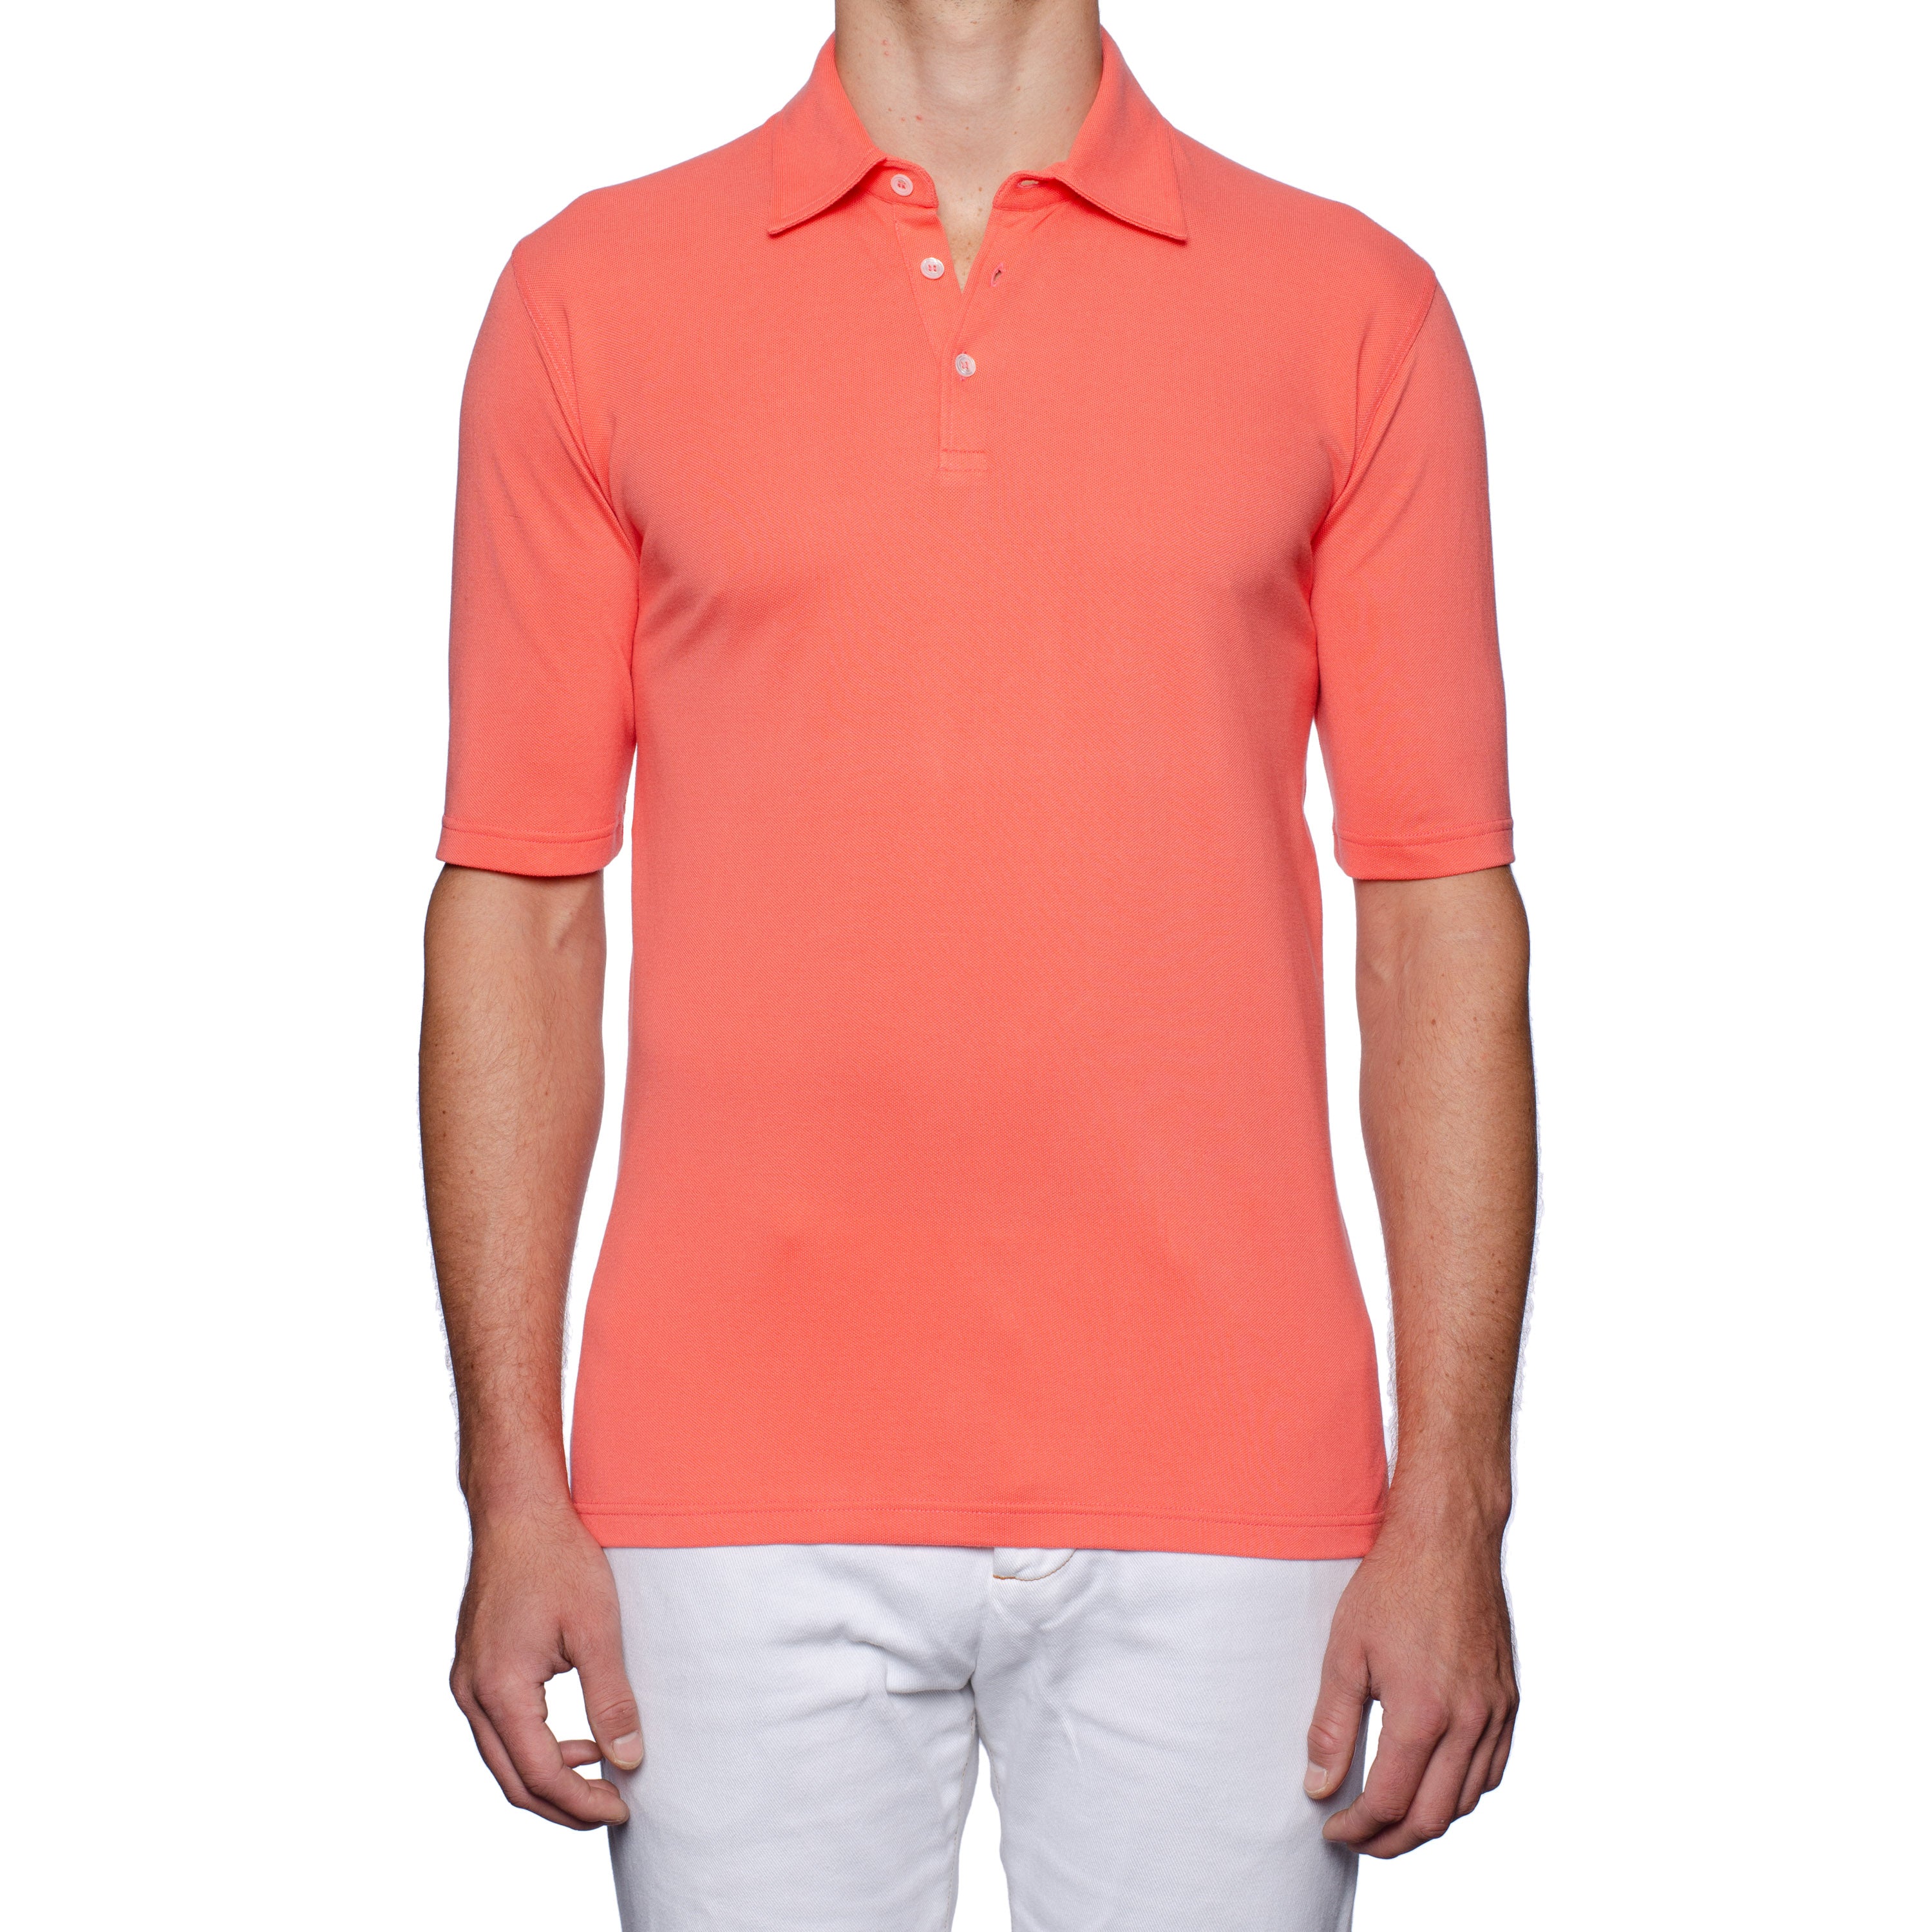 FEDELI "North" Salmon Cotton Pique Frosted Short Sleeve Polo Shirt EU 46 NEW US XS FEDELI